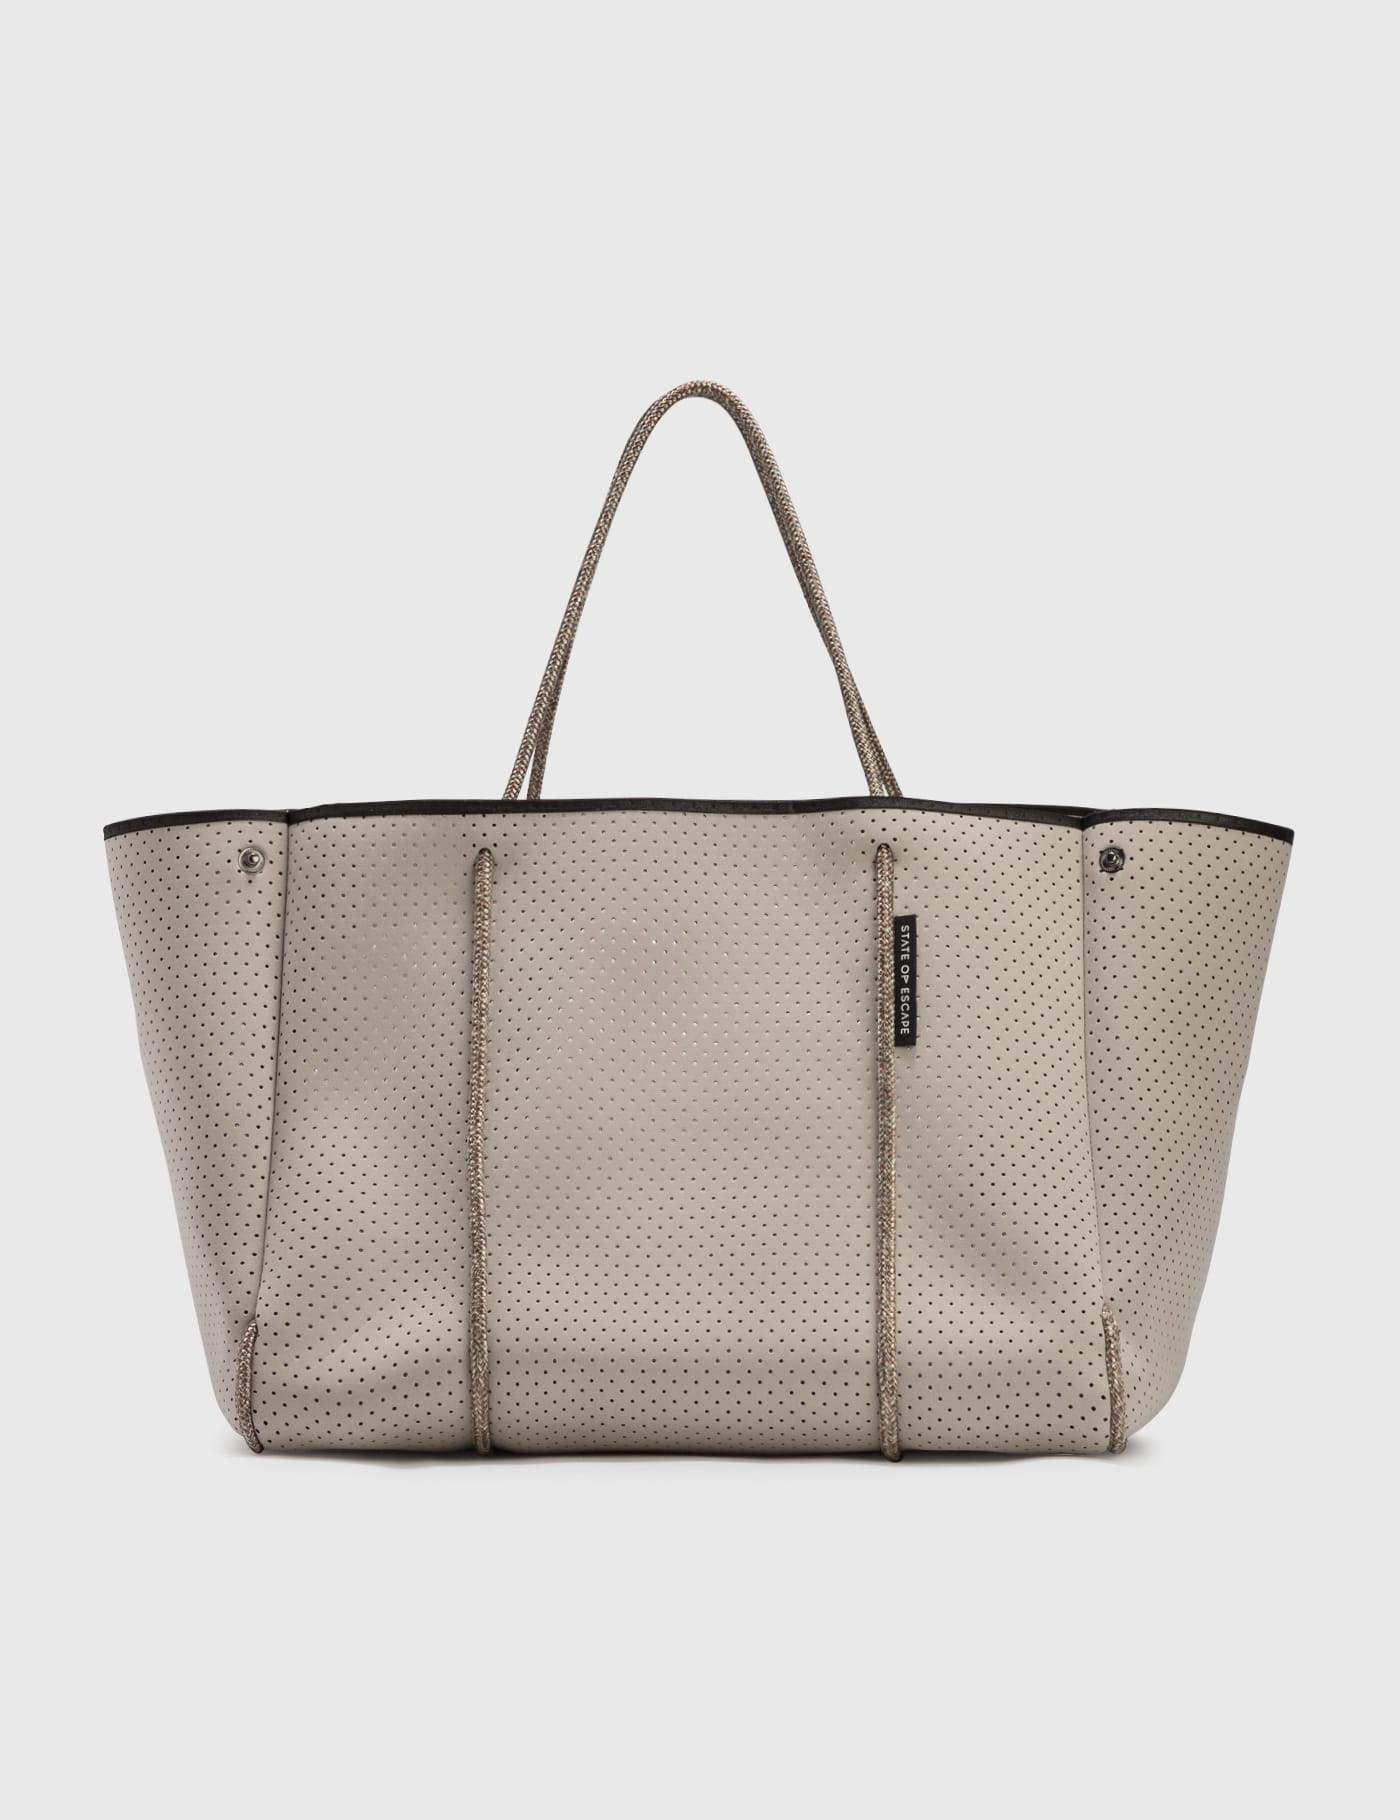 State of Escape - Escape Tote | HBX - Globally Curated Fashion and